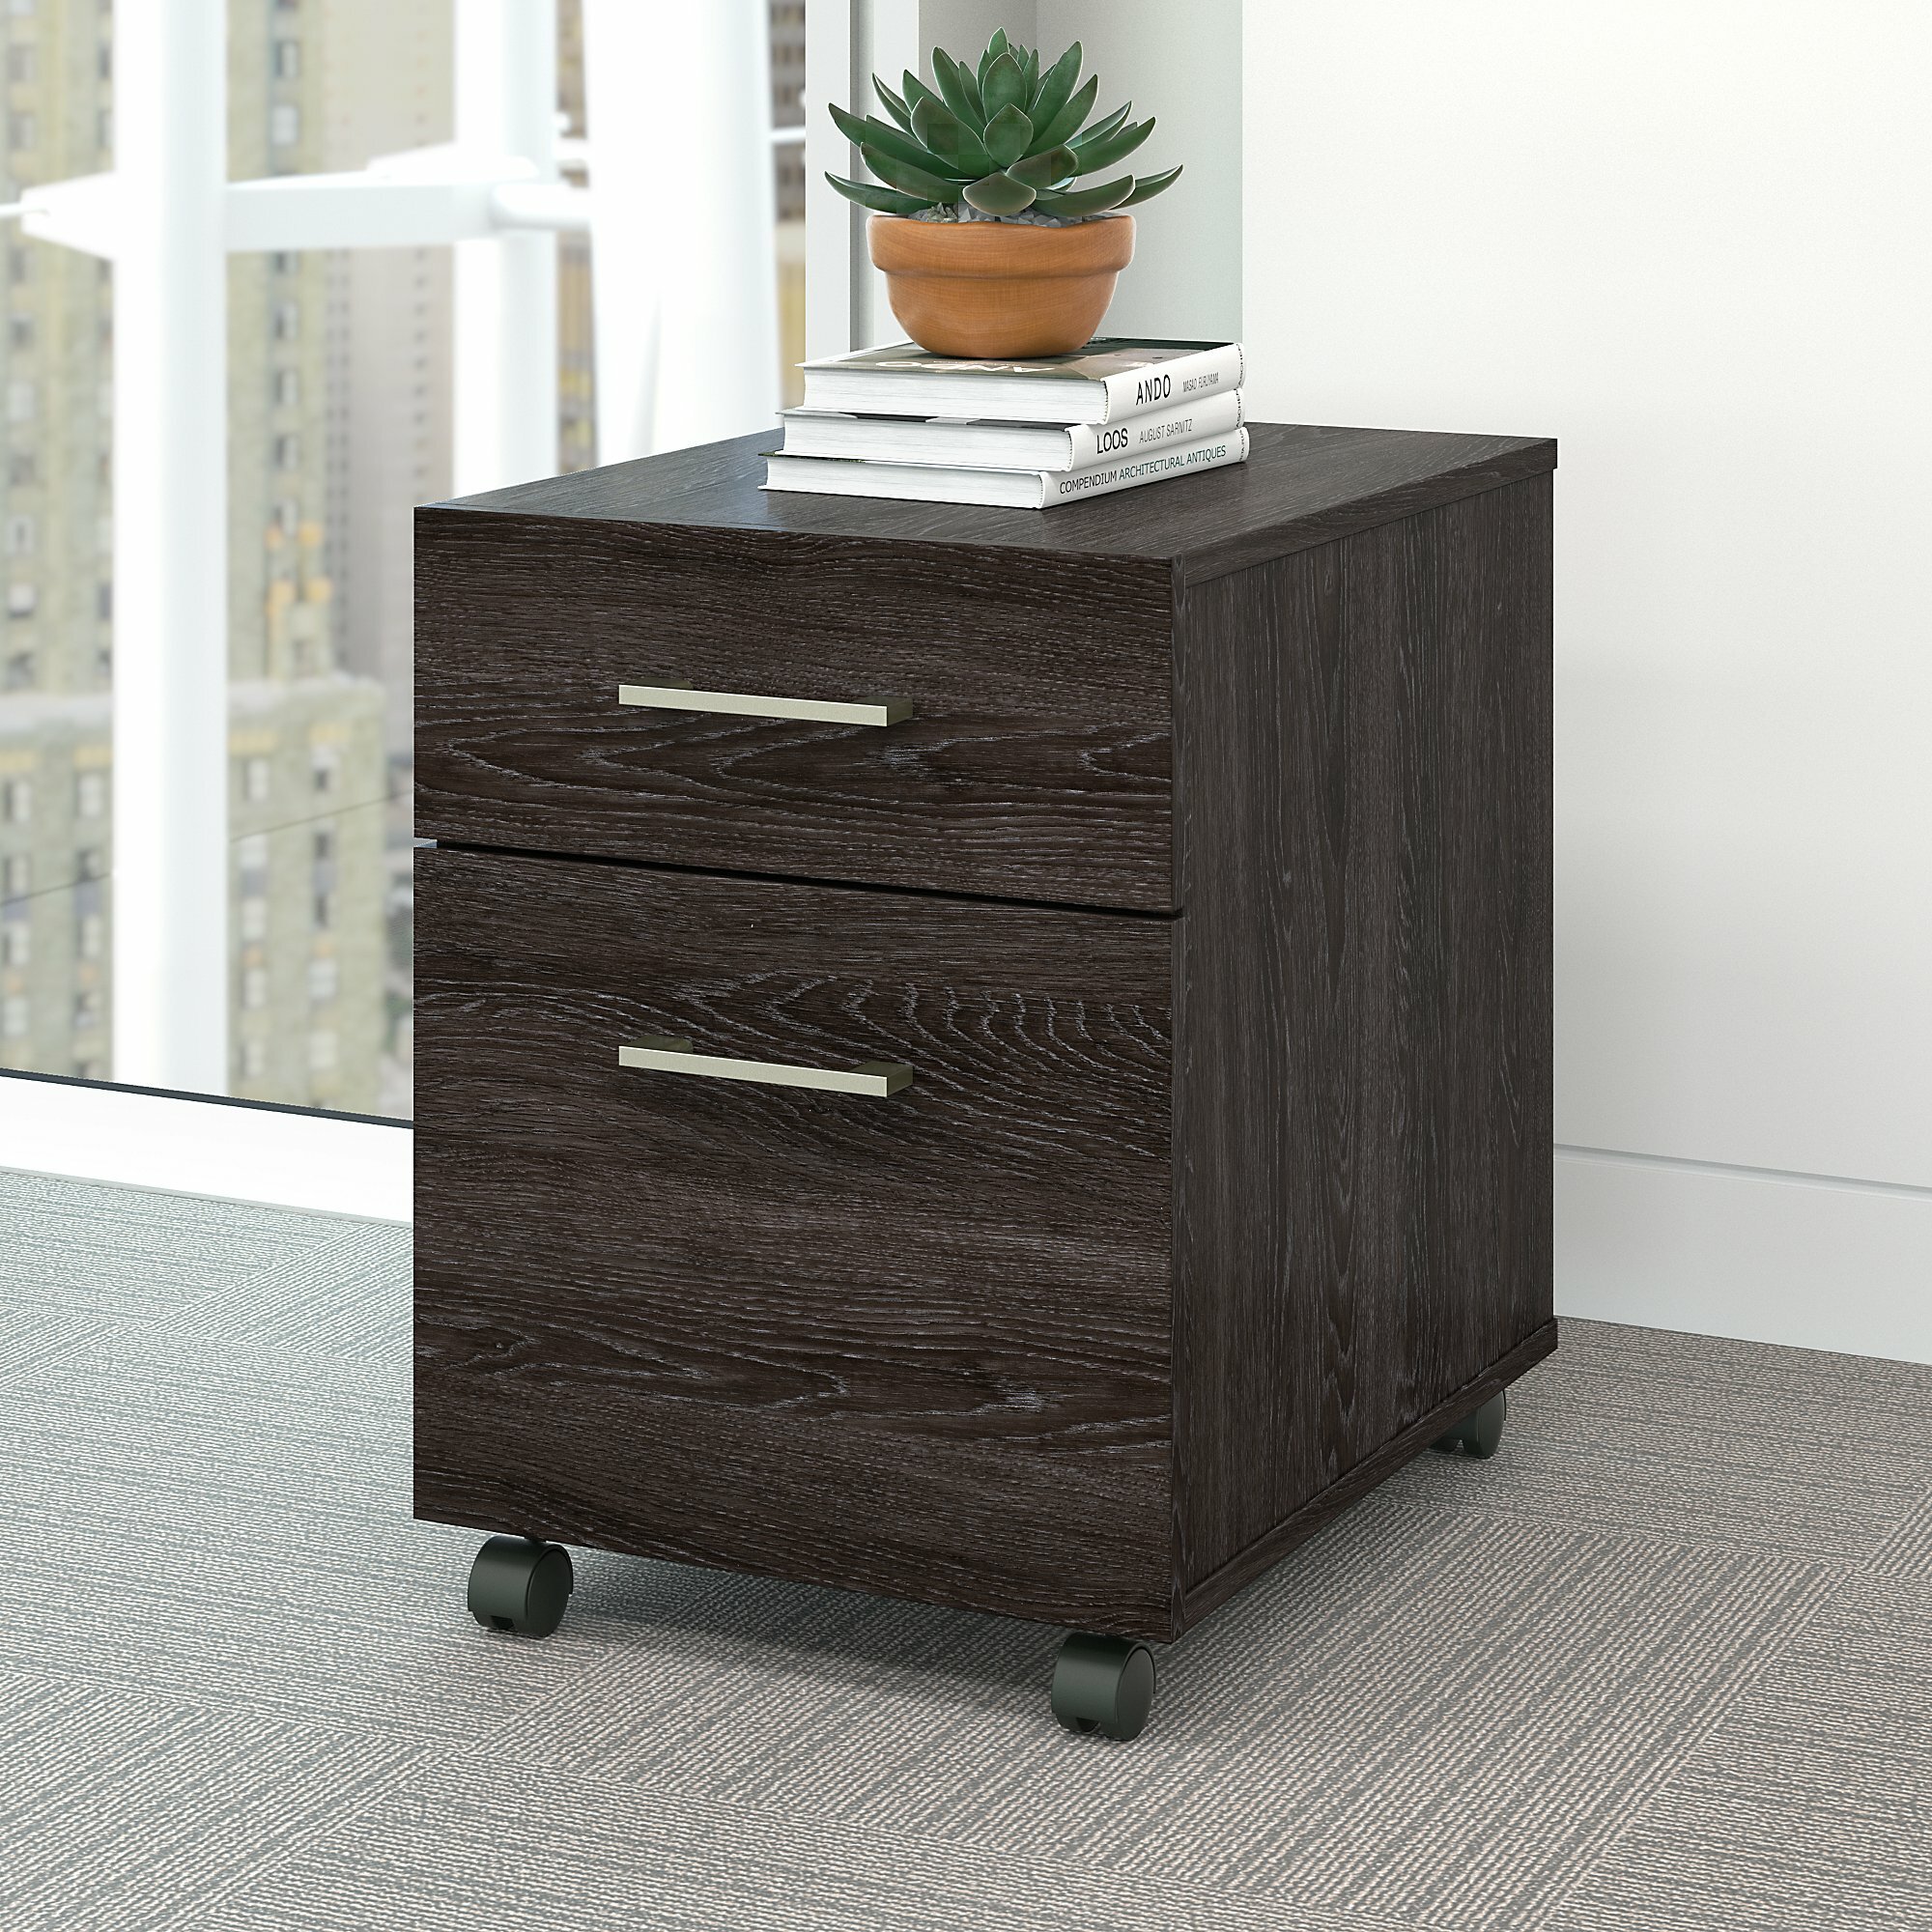 Wood Filing Cabinets You Ll Love In 2020